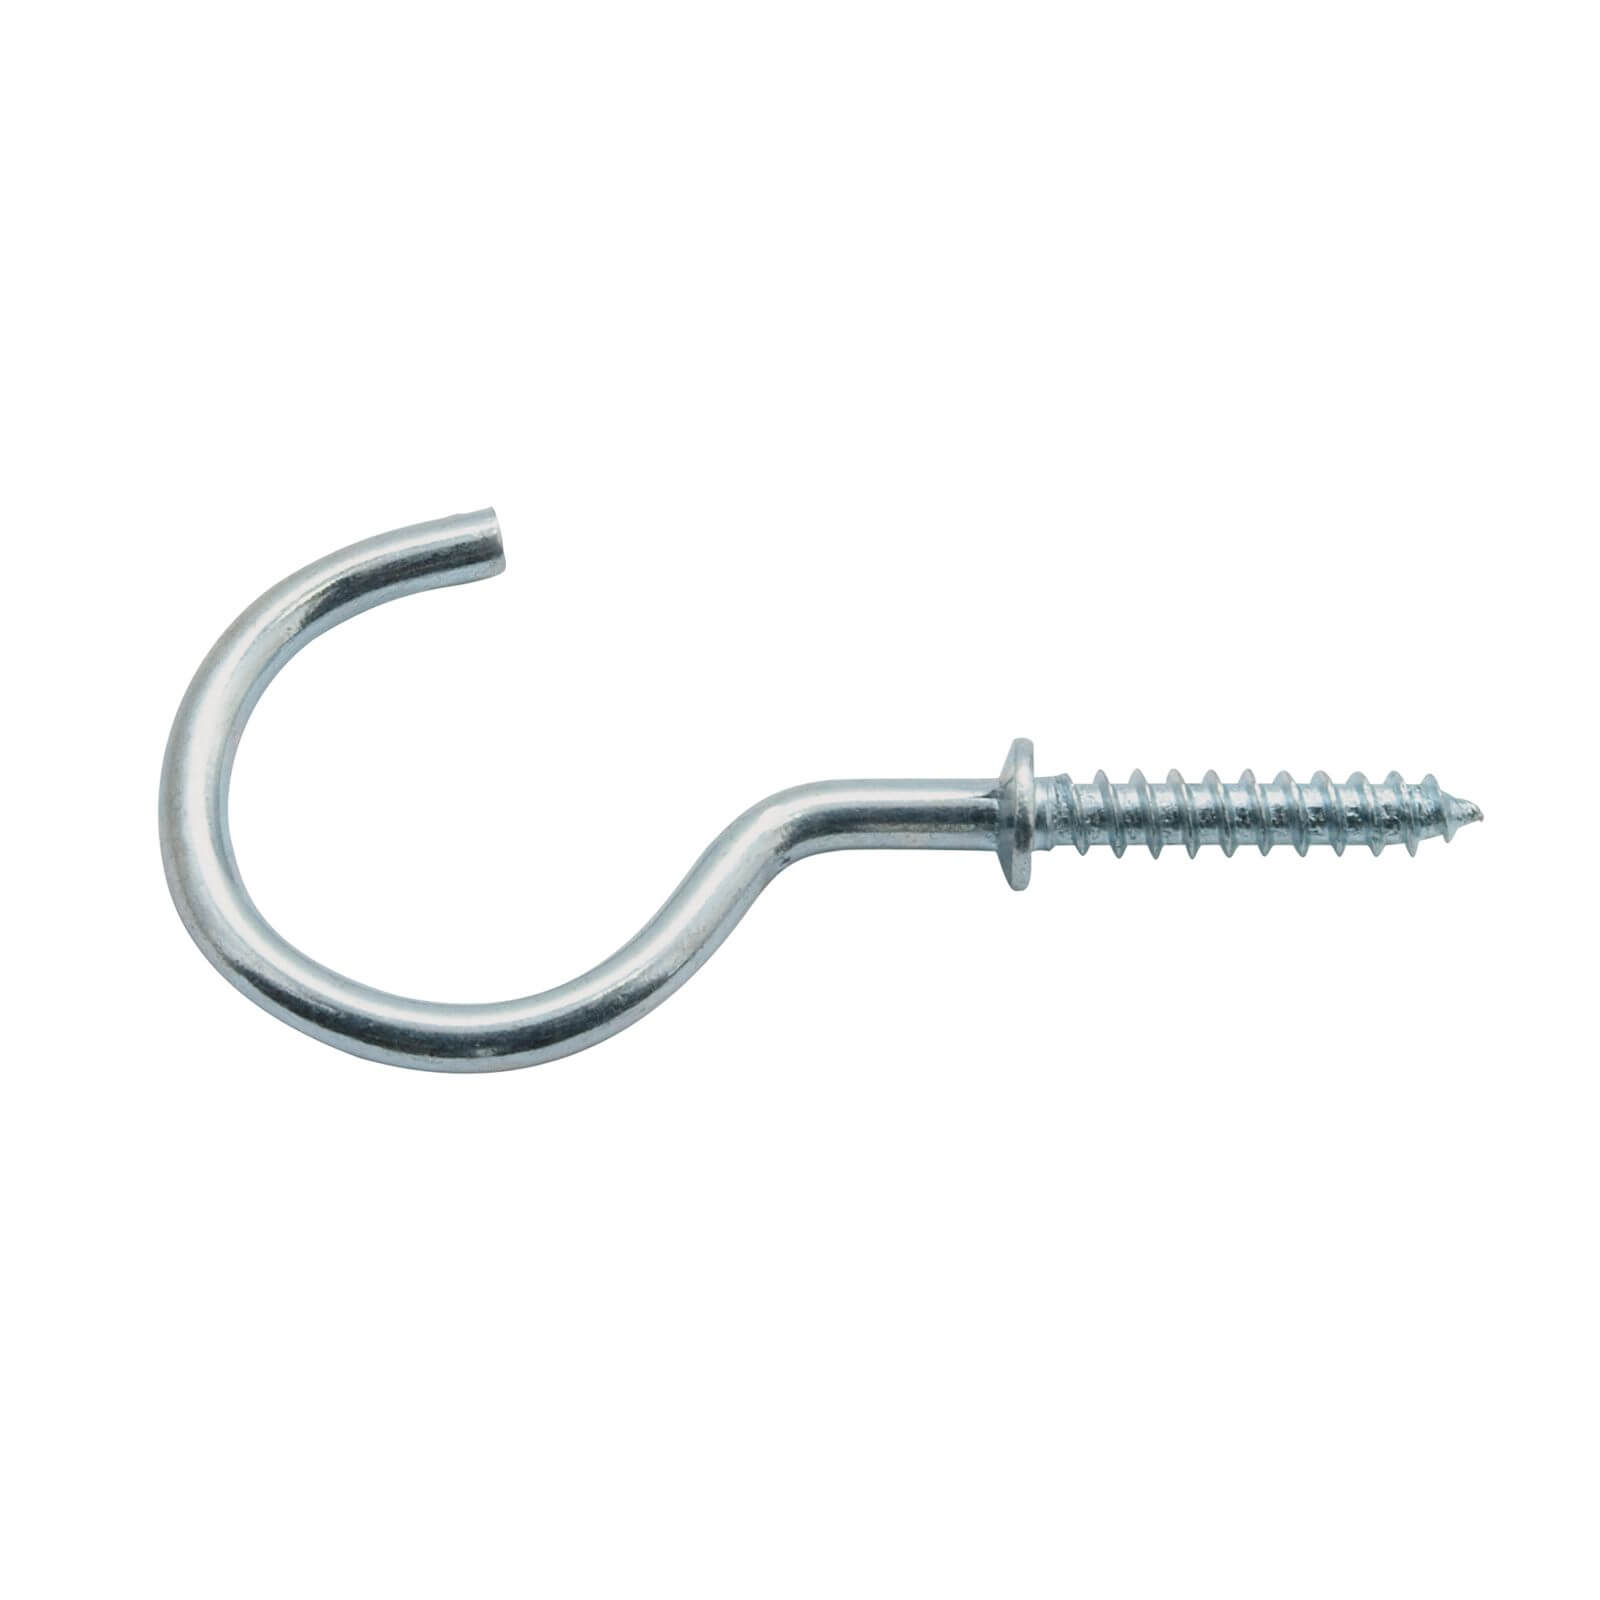 Photo of Round Cup Hook - Zinc Plated - 38mm - 25 Pack